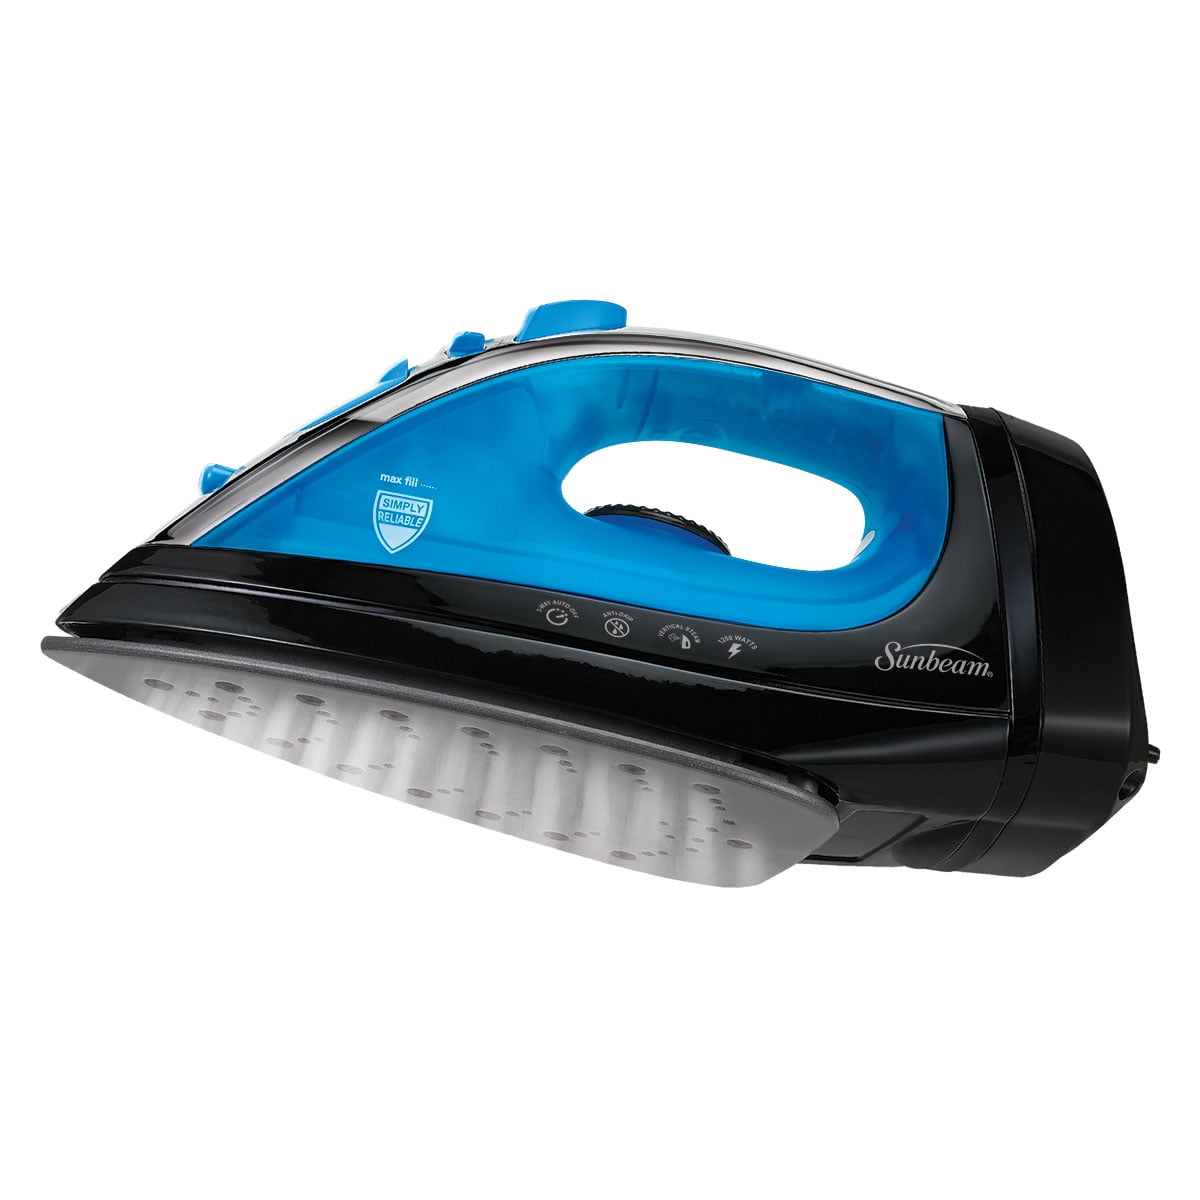 Sunbeam Steam Master Iron with Anti-Drip Non-Stick Stainless Steel Soleplate 